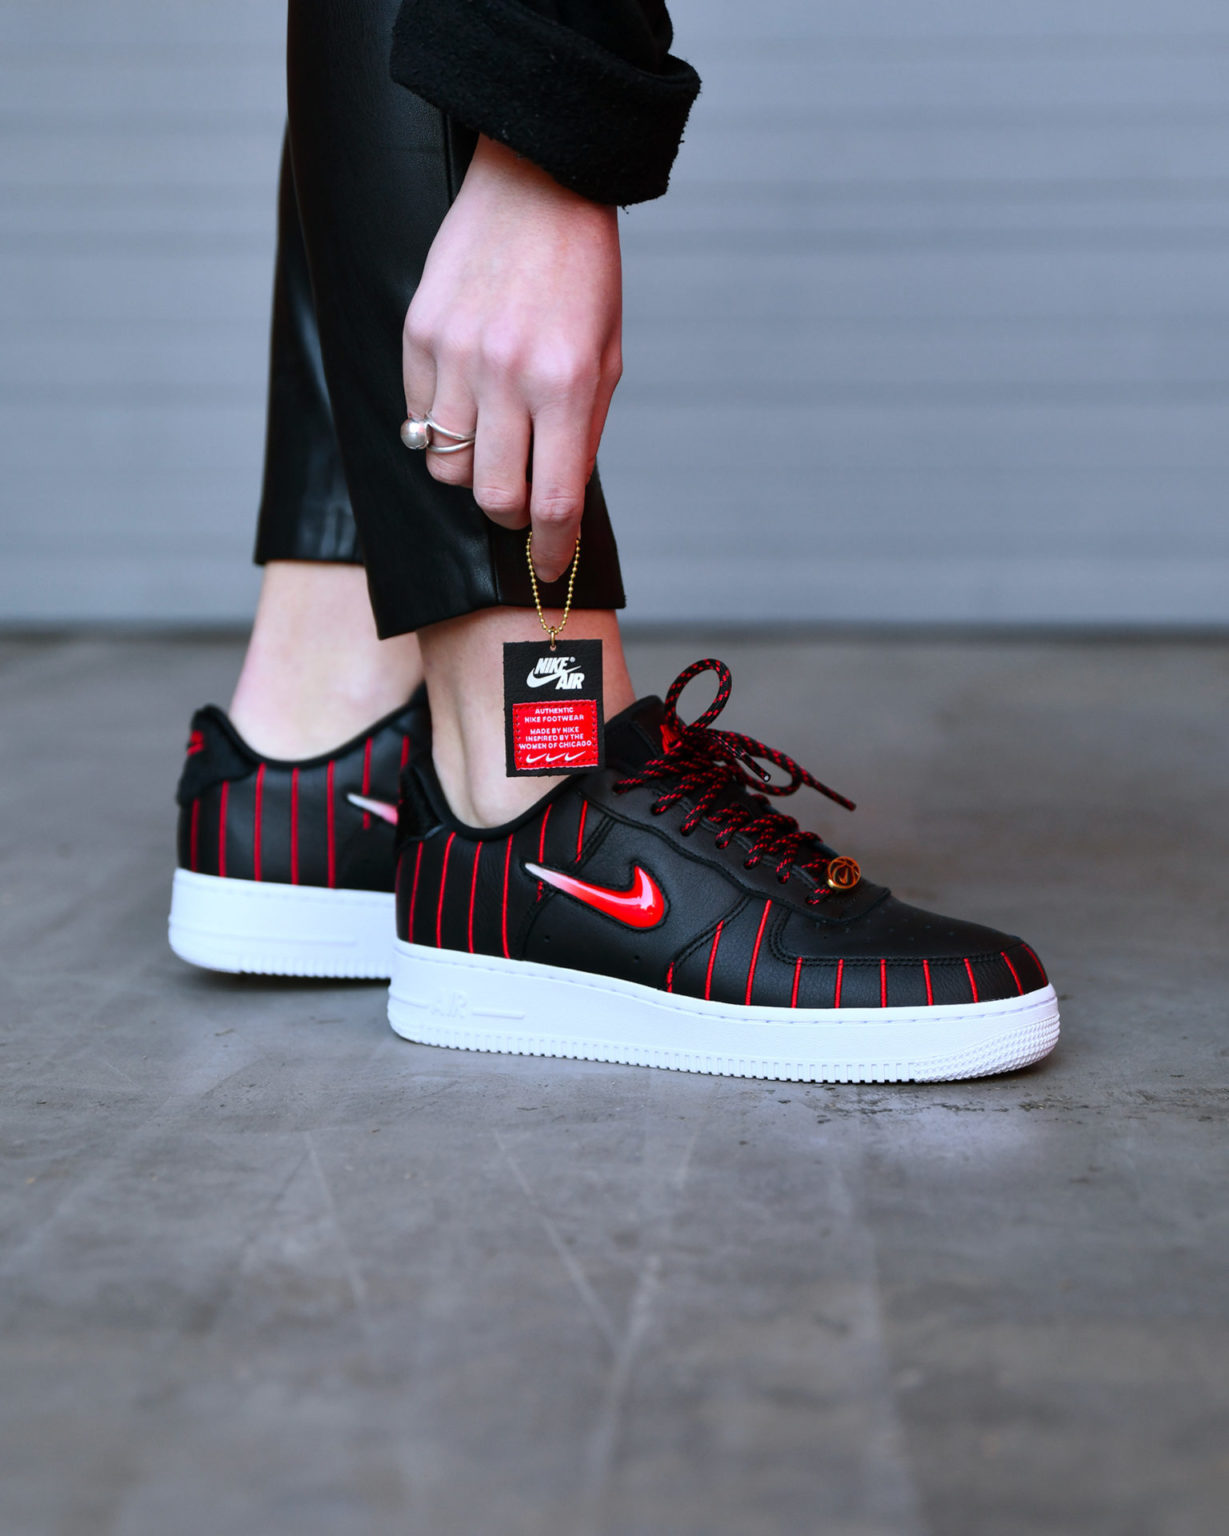 Nike W Air Force 1 Jewel QS “Chicago” - Sneakers.fr